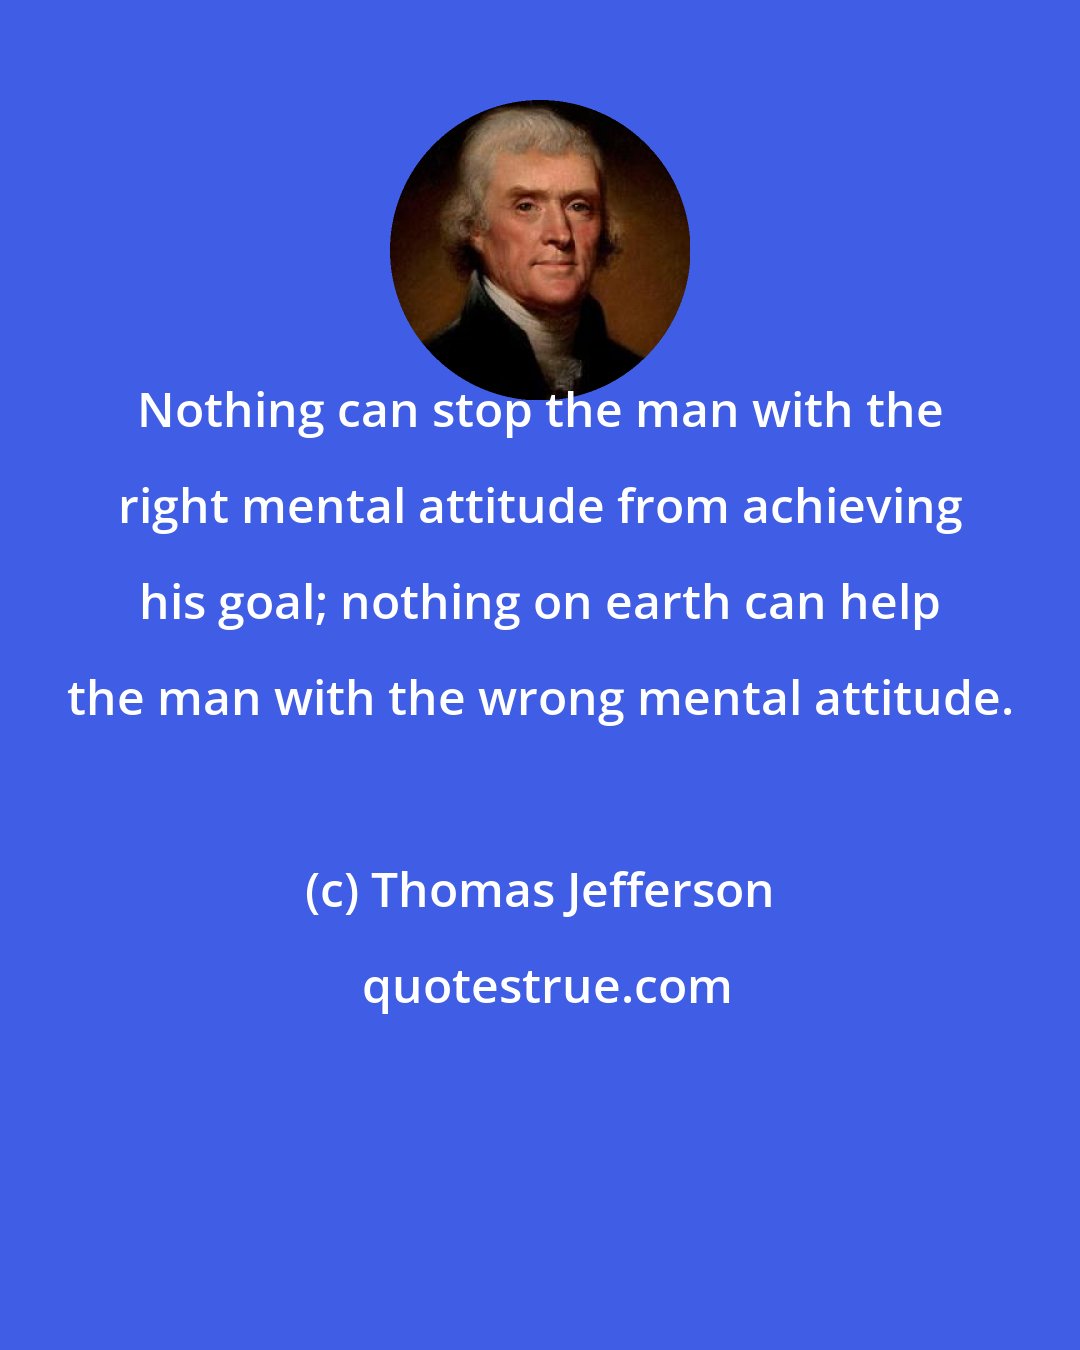 Thomas Jefferson: Nothing can stop the man with the right mental attitude from achieving his goal; nothing on earth can help the man with the wrong mental attitude.